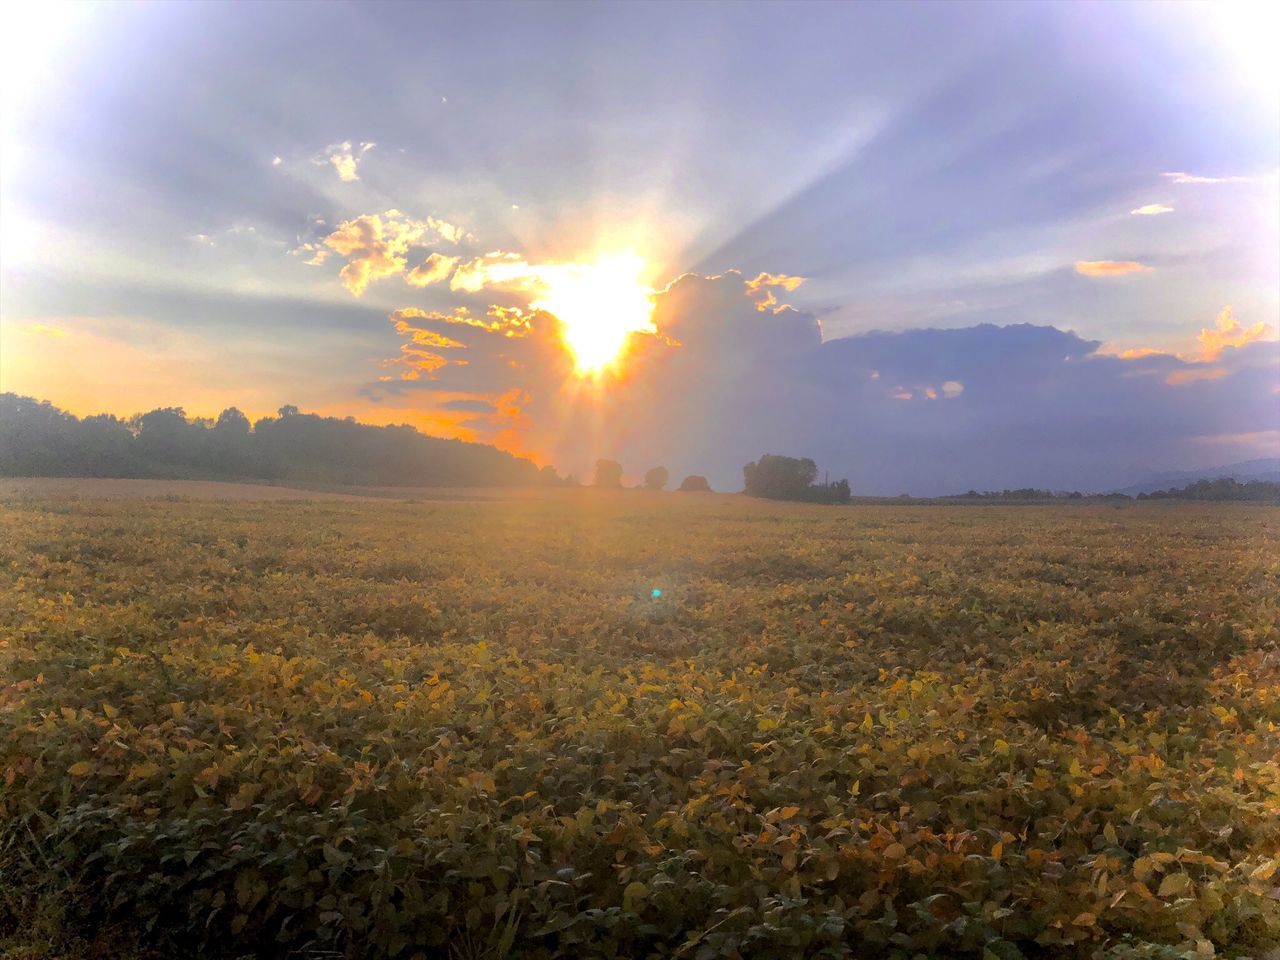 sky, landscape, environment, morning, horizon, sunlight, sun, field, sunrise, nature, sunbeam, land, beauty in nature, cloud, plant, scenics - nature, lens flare, dawn, rural scene, agriculture, tranquility, plain, crop, tranquil scene, twilight, freshness, no people, back lit, idyllic, summer, dramatic sky, yellow, tree, flower, outdoors, gold, growth, multi colored, grass, horizon over land, hill, flowering plant, meadow, cloudscape, food and drink, food, light - natural phenomenon, fog, farm, non-urban scene, urban skyline, blue, prairie, autumn, day, moody sky, springtime, sunny, vibrant color, plant part, cereal plant, rural area, wildflower, abundance, grassland, orange color, leaf, forest, travel